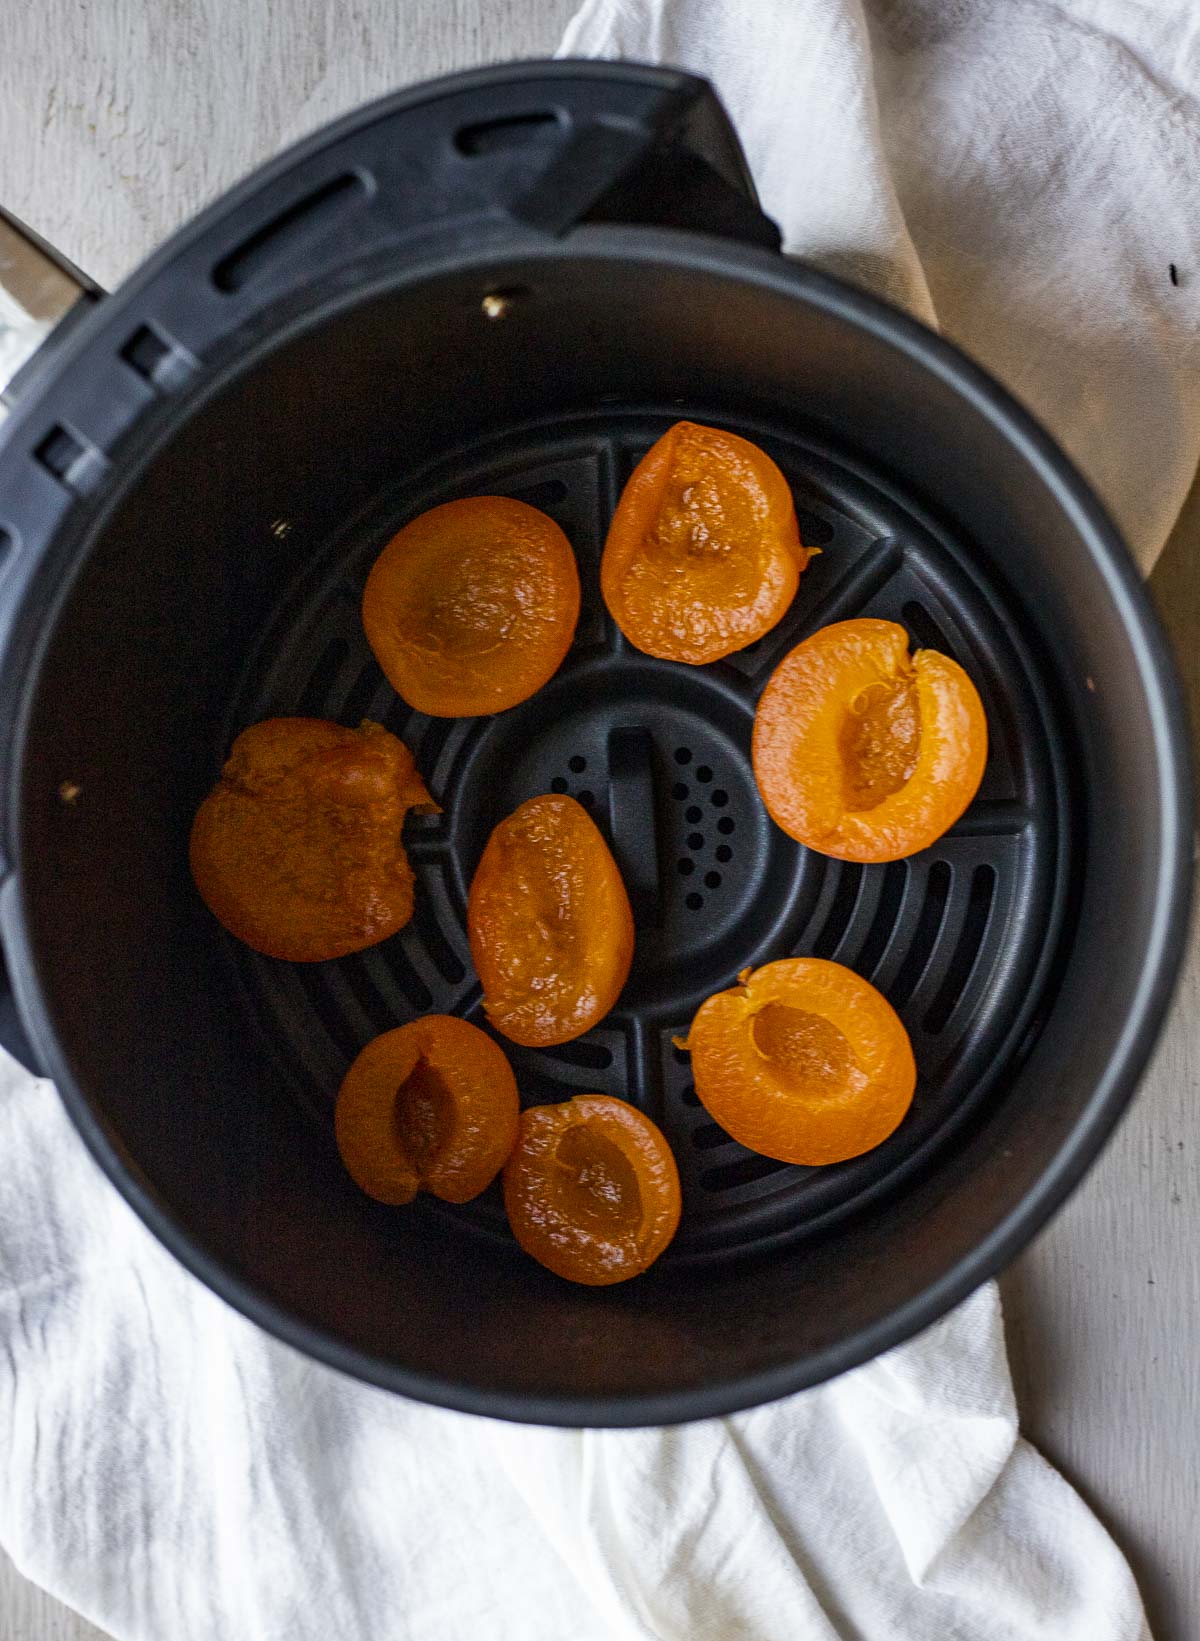 Apricot halves arranged in a single layer in an air fryer basket.